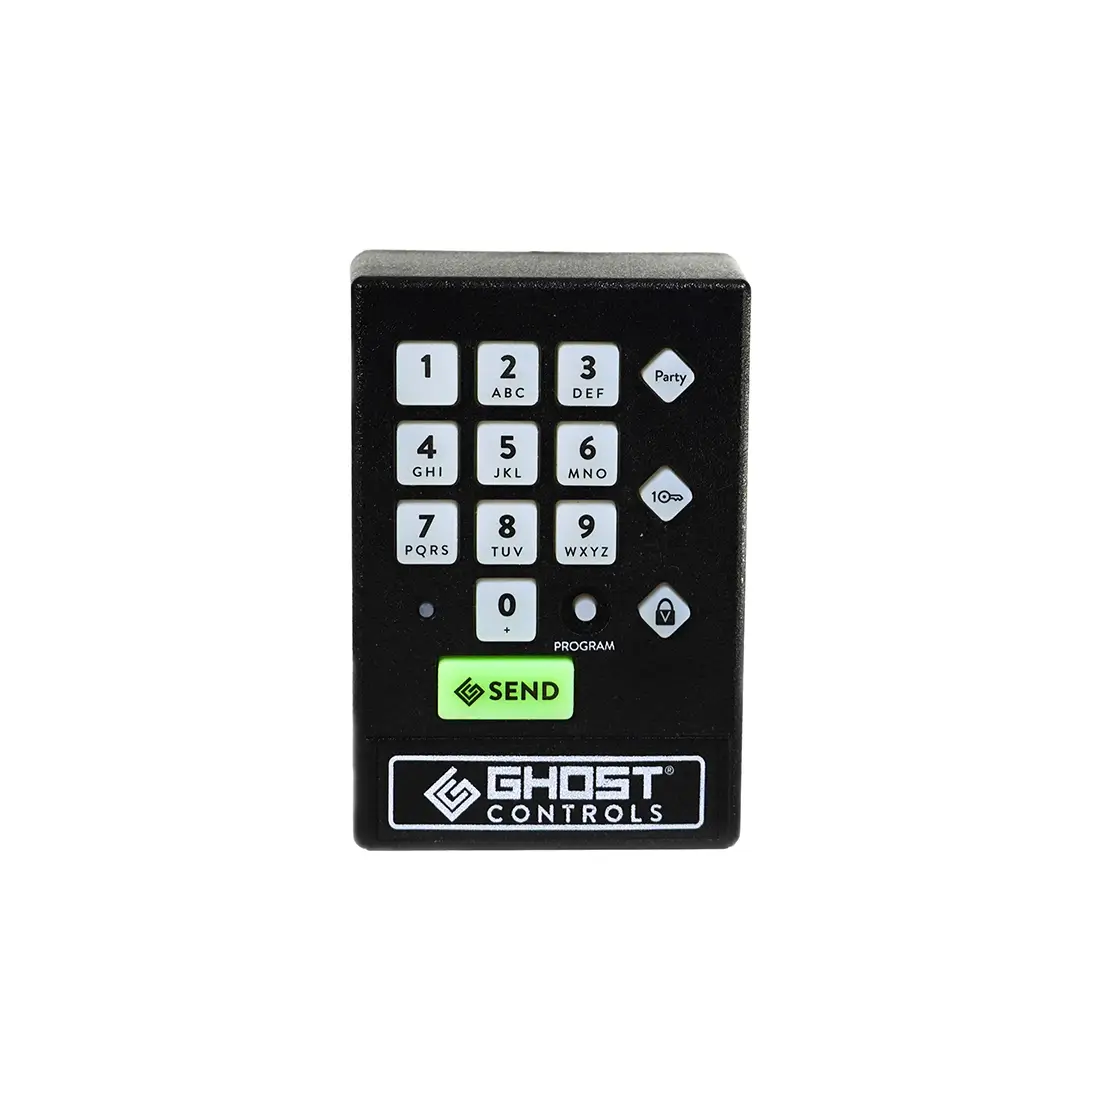 Do you have a cover for my new keypad?